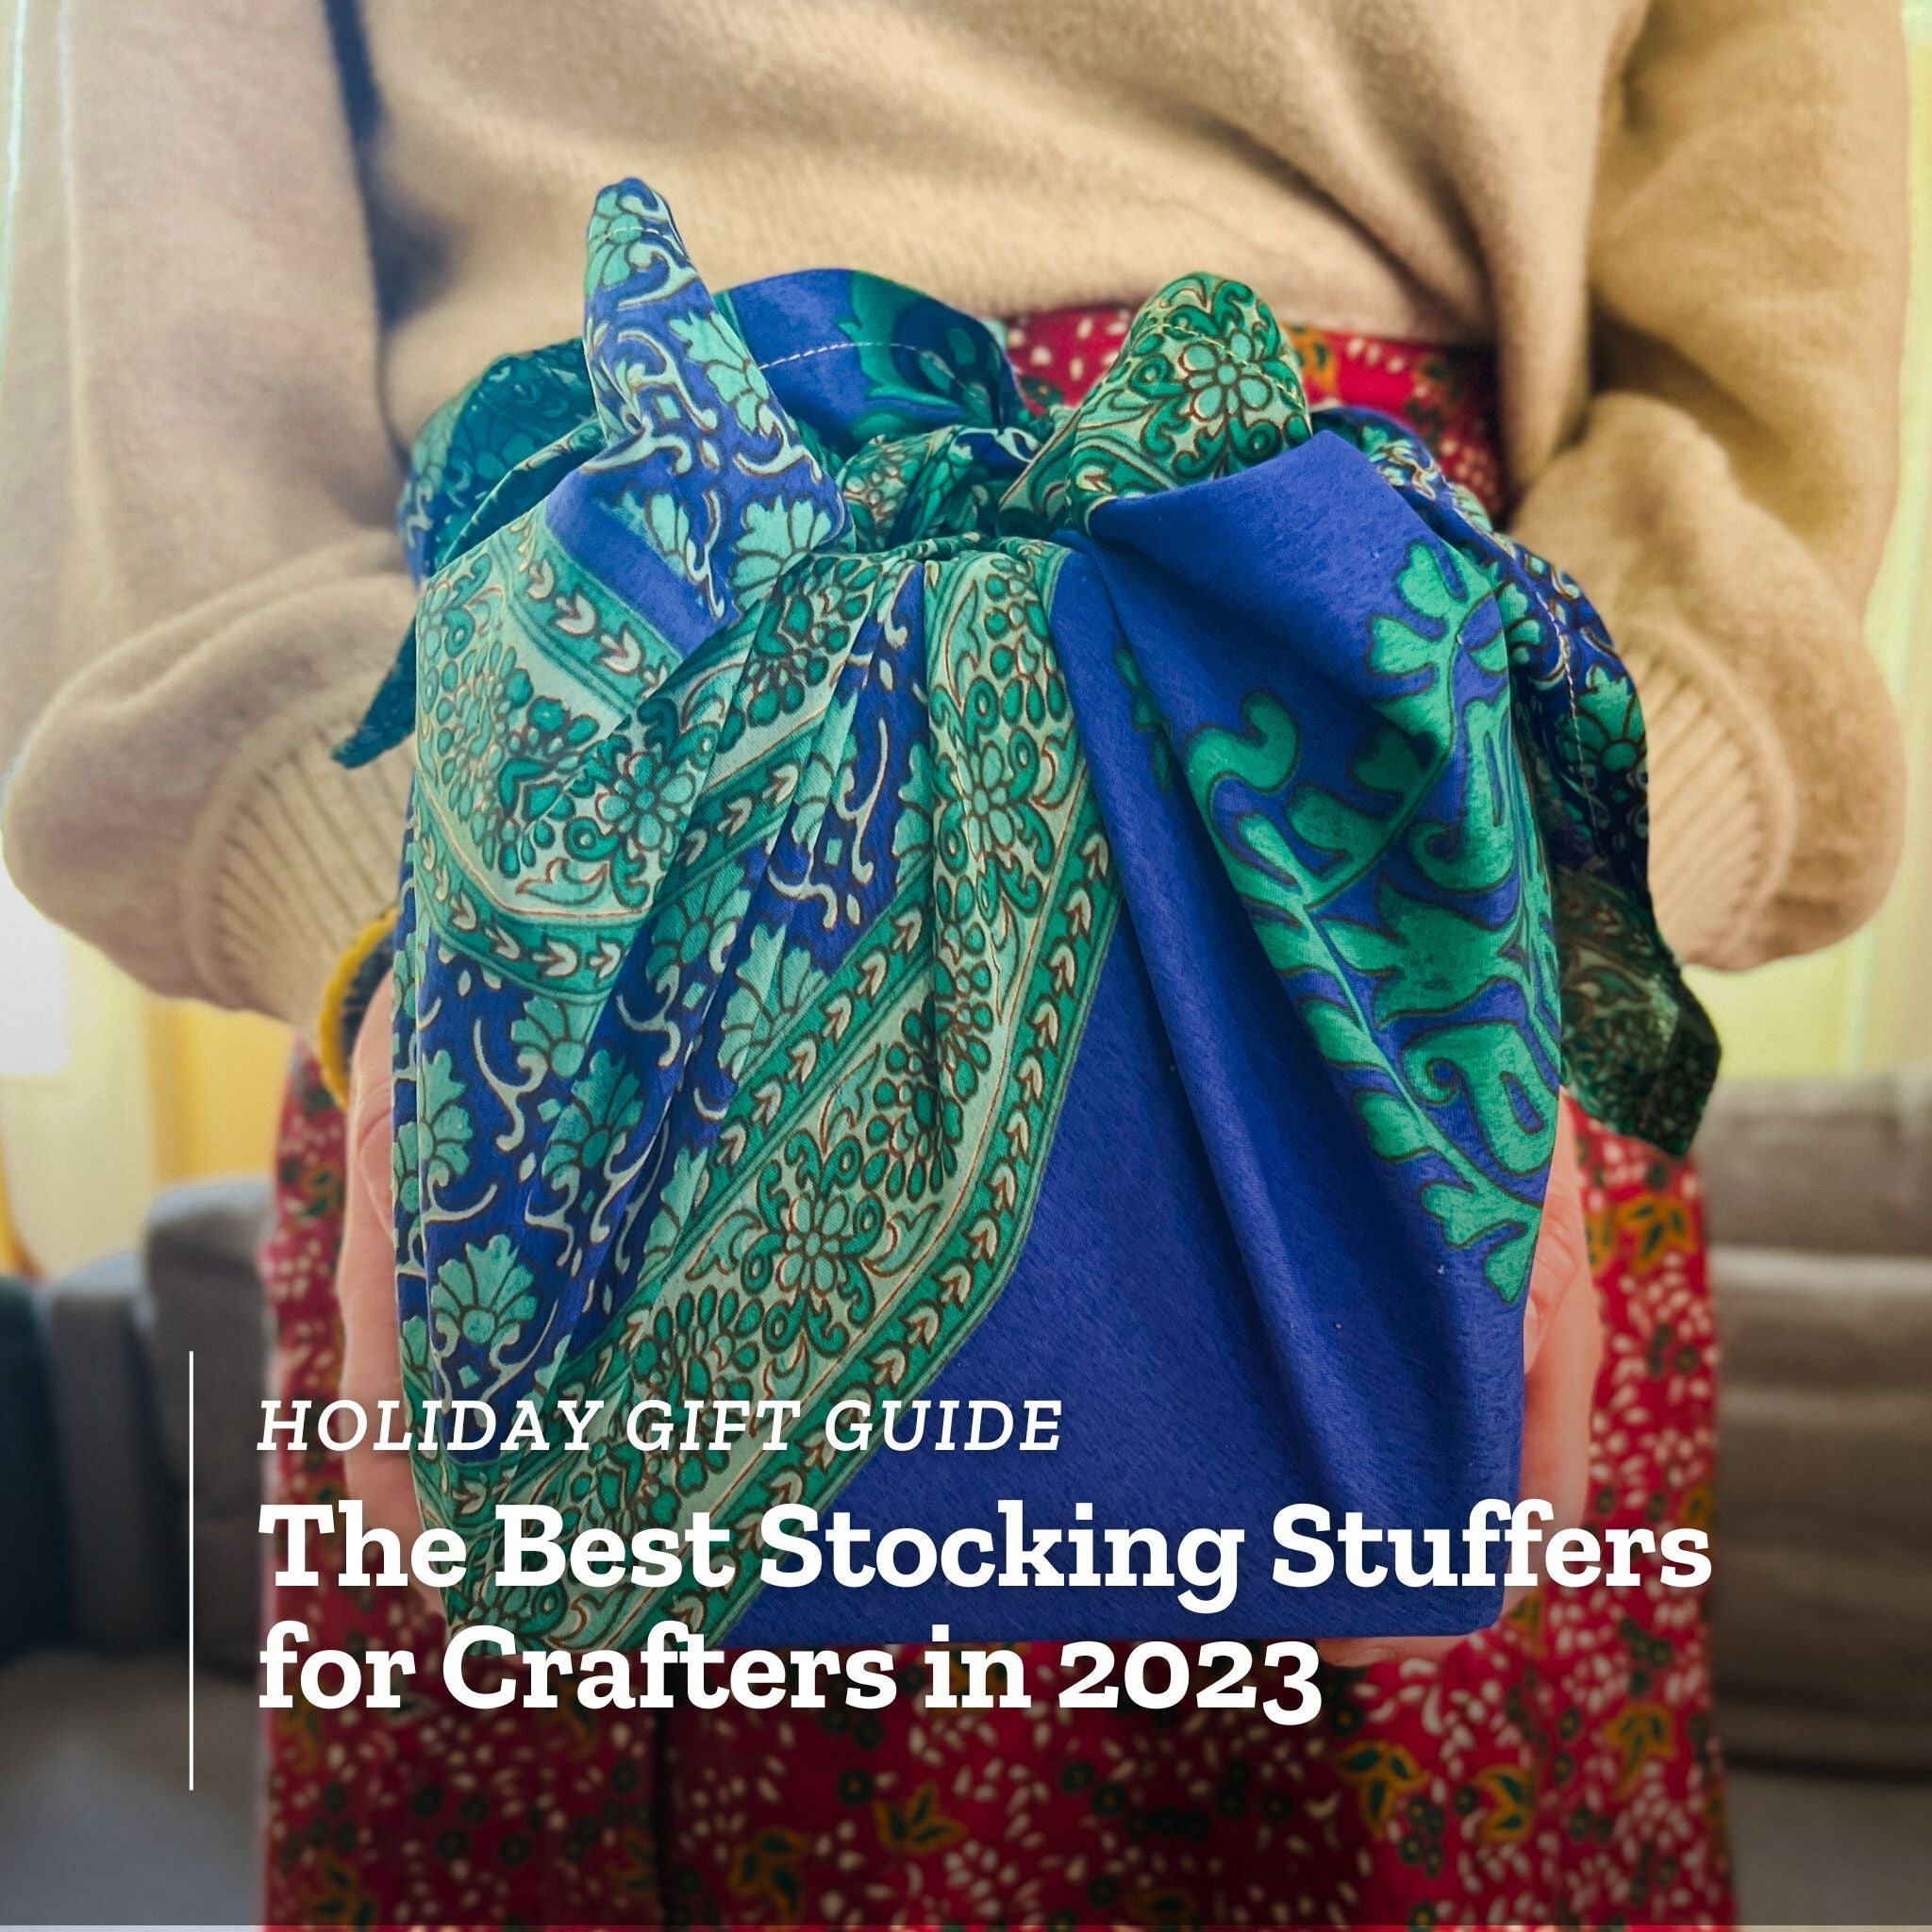 The Best Stocking Stuffers for Crafters in 2023